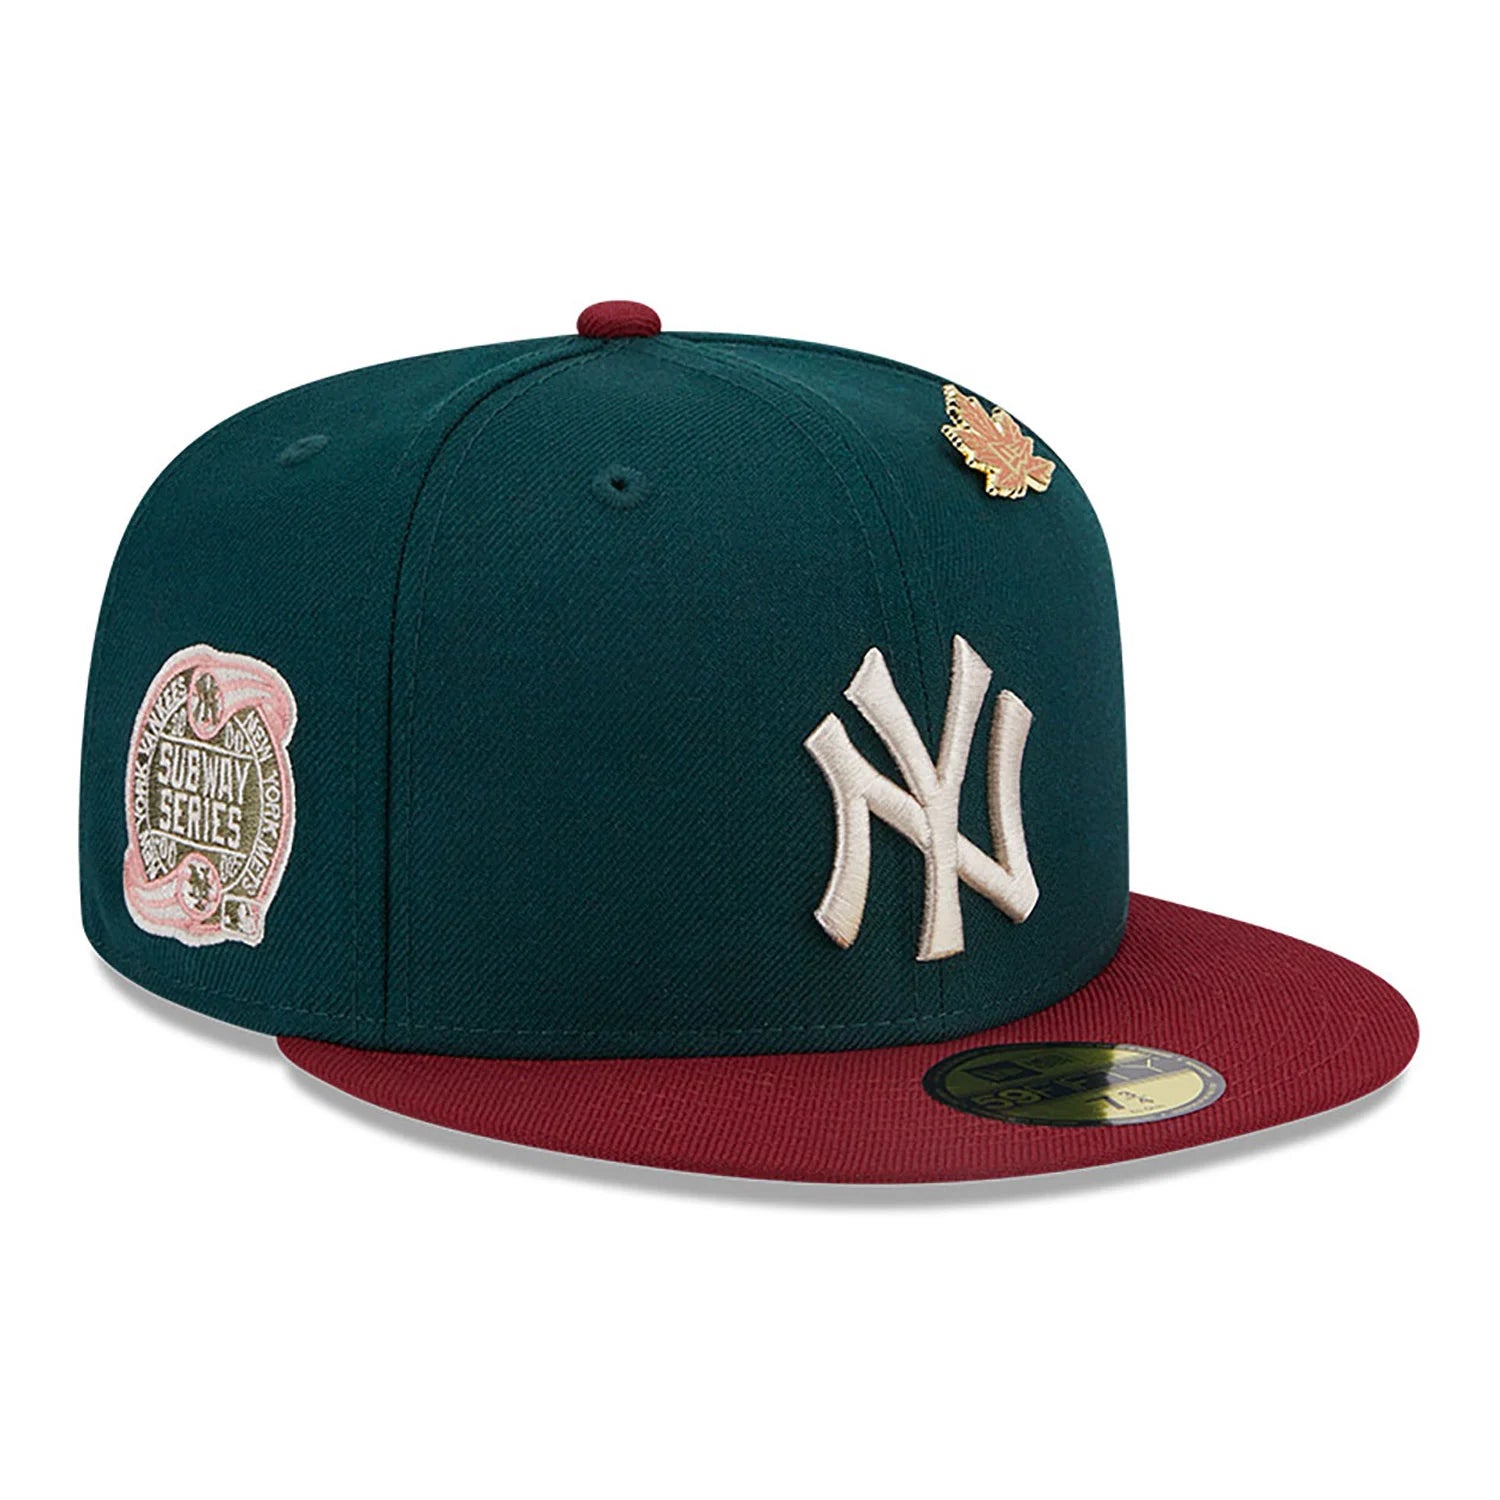 NEW ERA 59FIFTY MLB CONTRAST WORLD SERIES NEW YORK YANKEES TWO TONE / GREY UV FITTED CAP